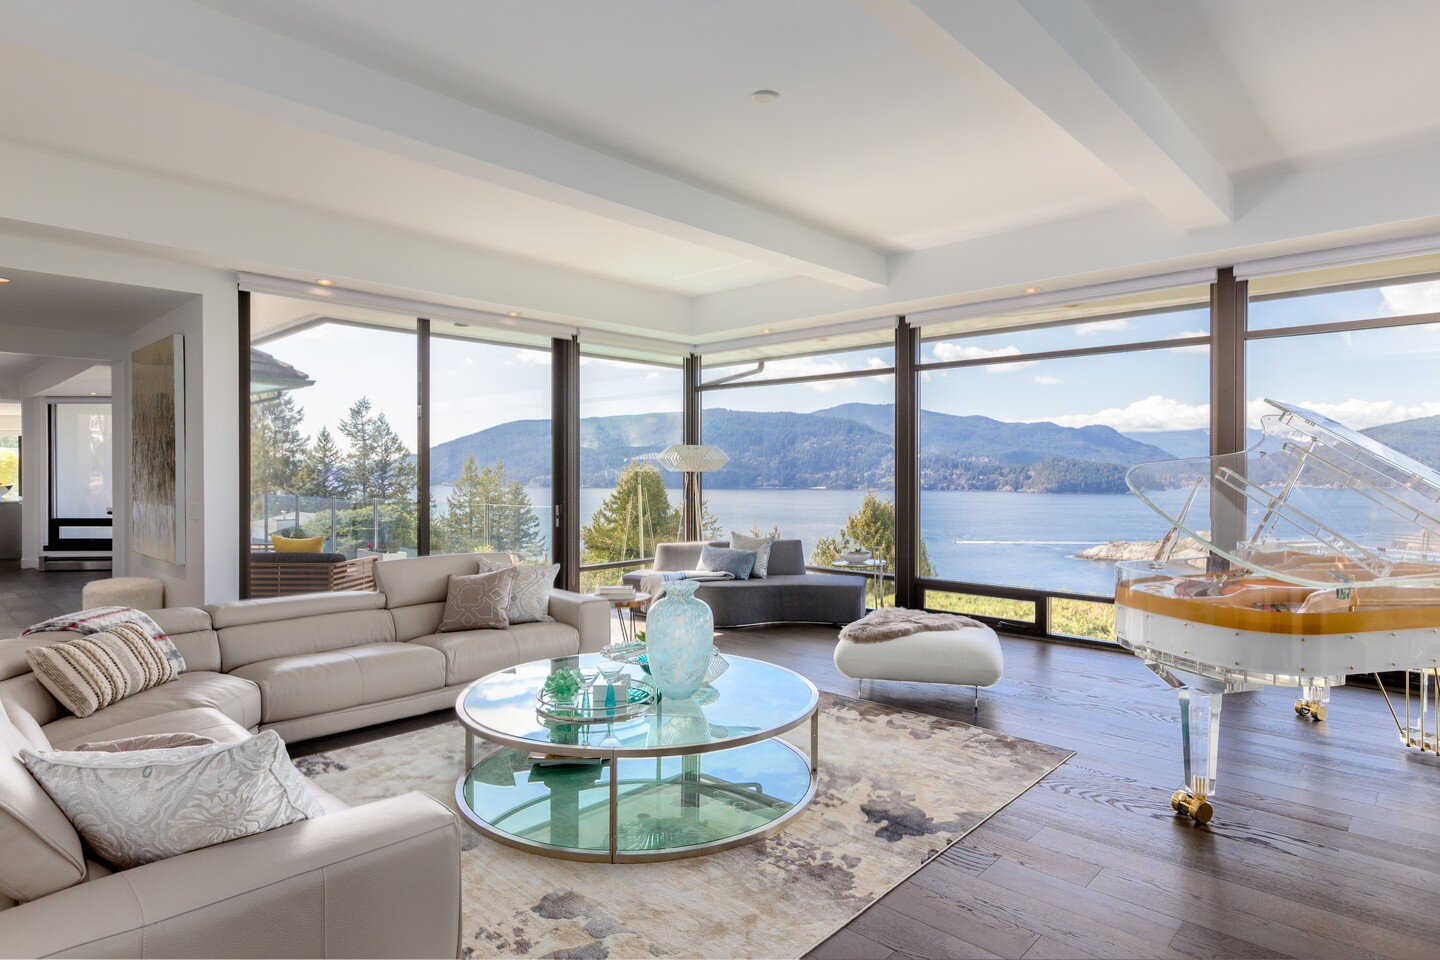 Check out the stunning view from another angle! Now we know why this is P's favourite room! 😍
.
.
.
.

#homestaging #homedecor #interiors #love #beautiful #photography #realestate #vancouverrealestate #photooftheday #furniture #architecture #luxuryh